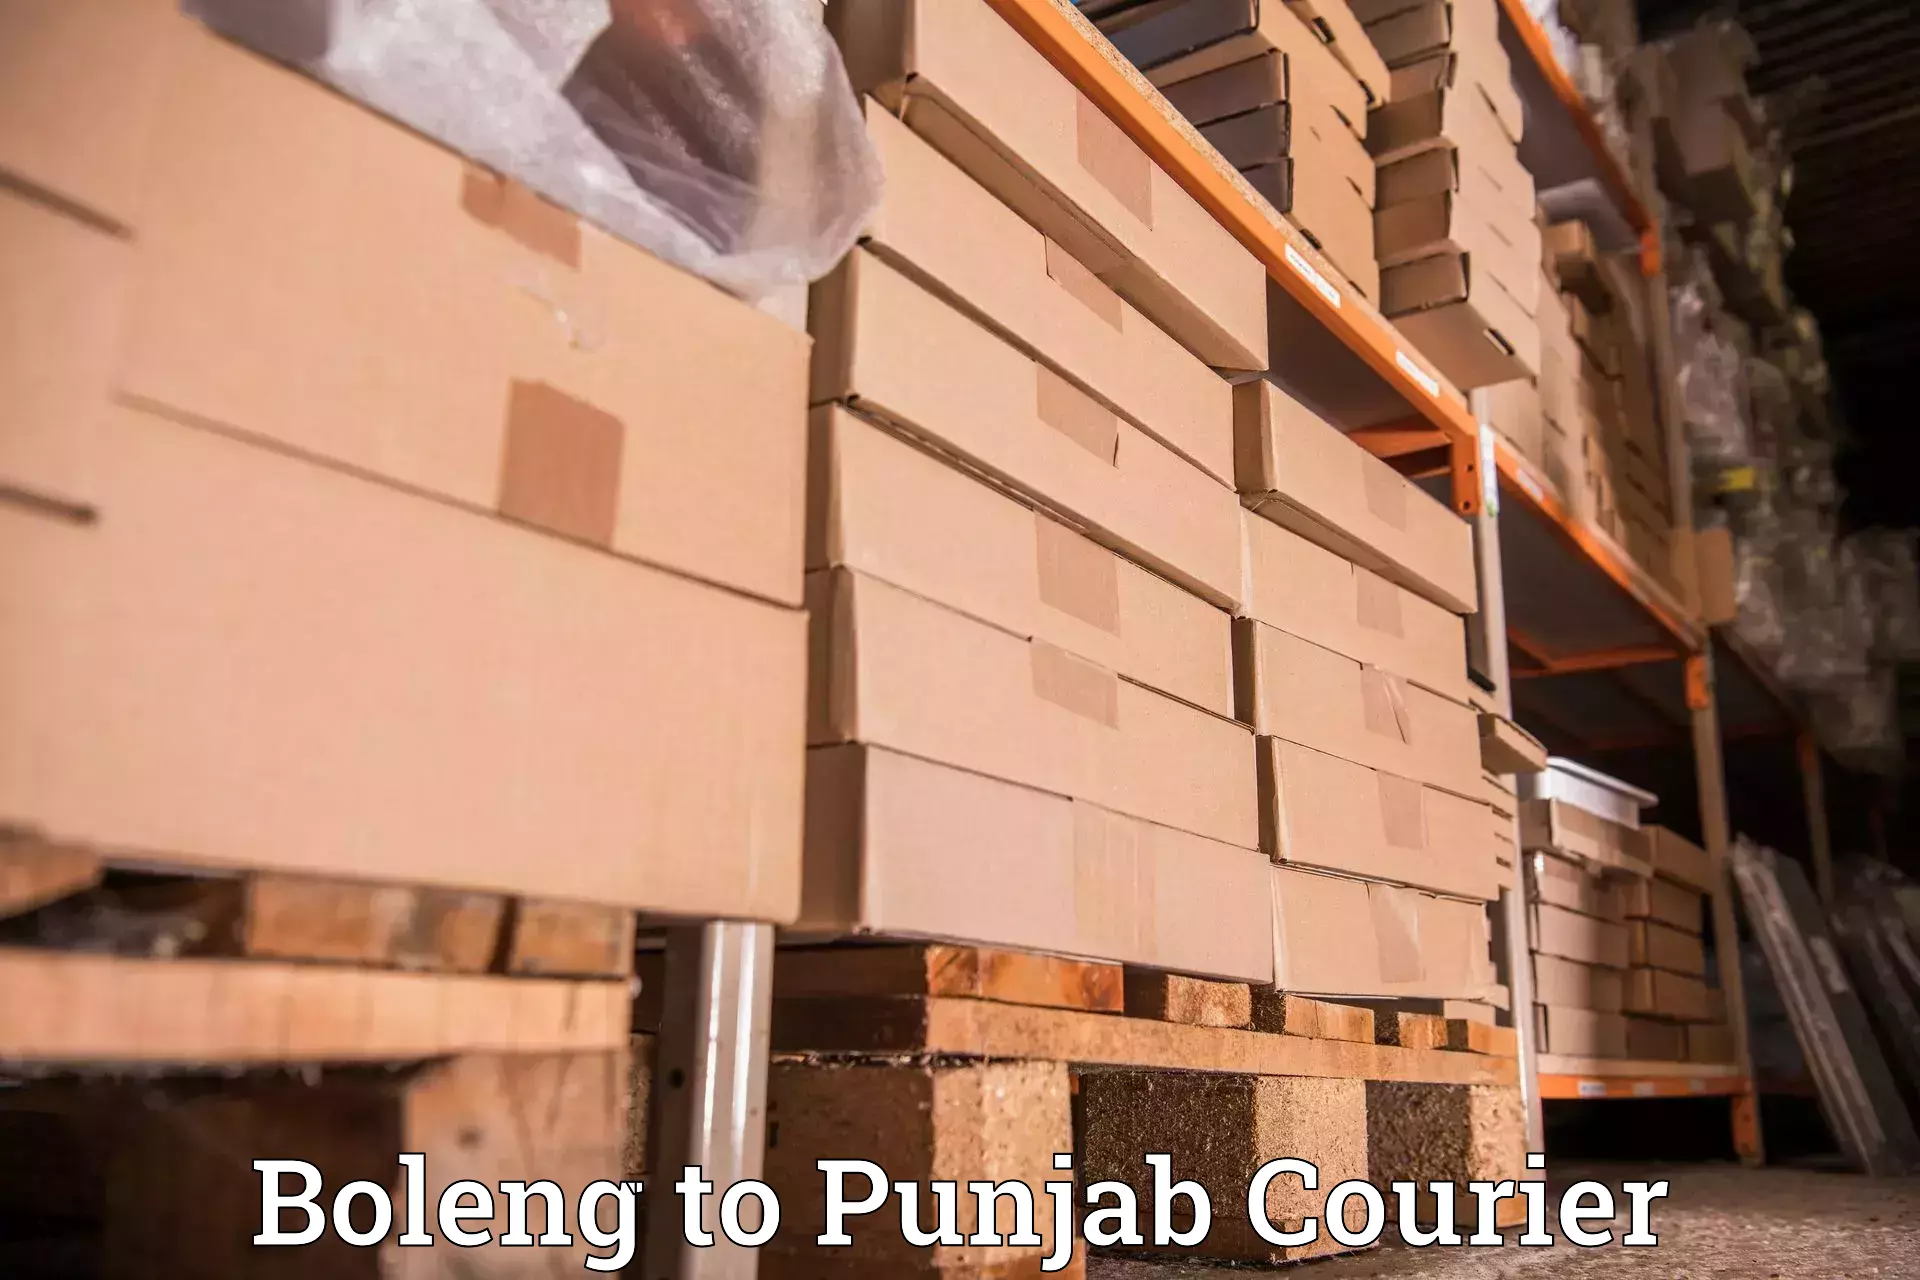 Next-day delivery options Boleng to Punjab